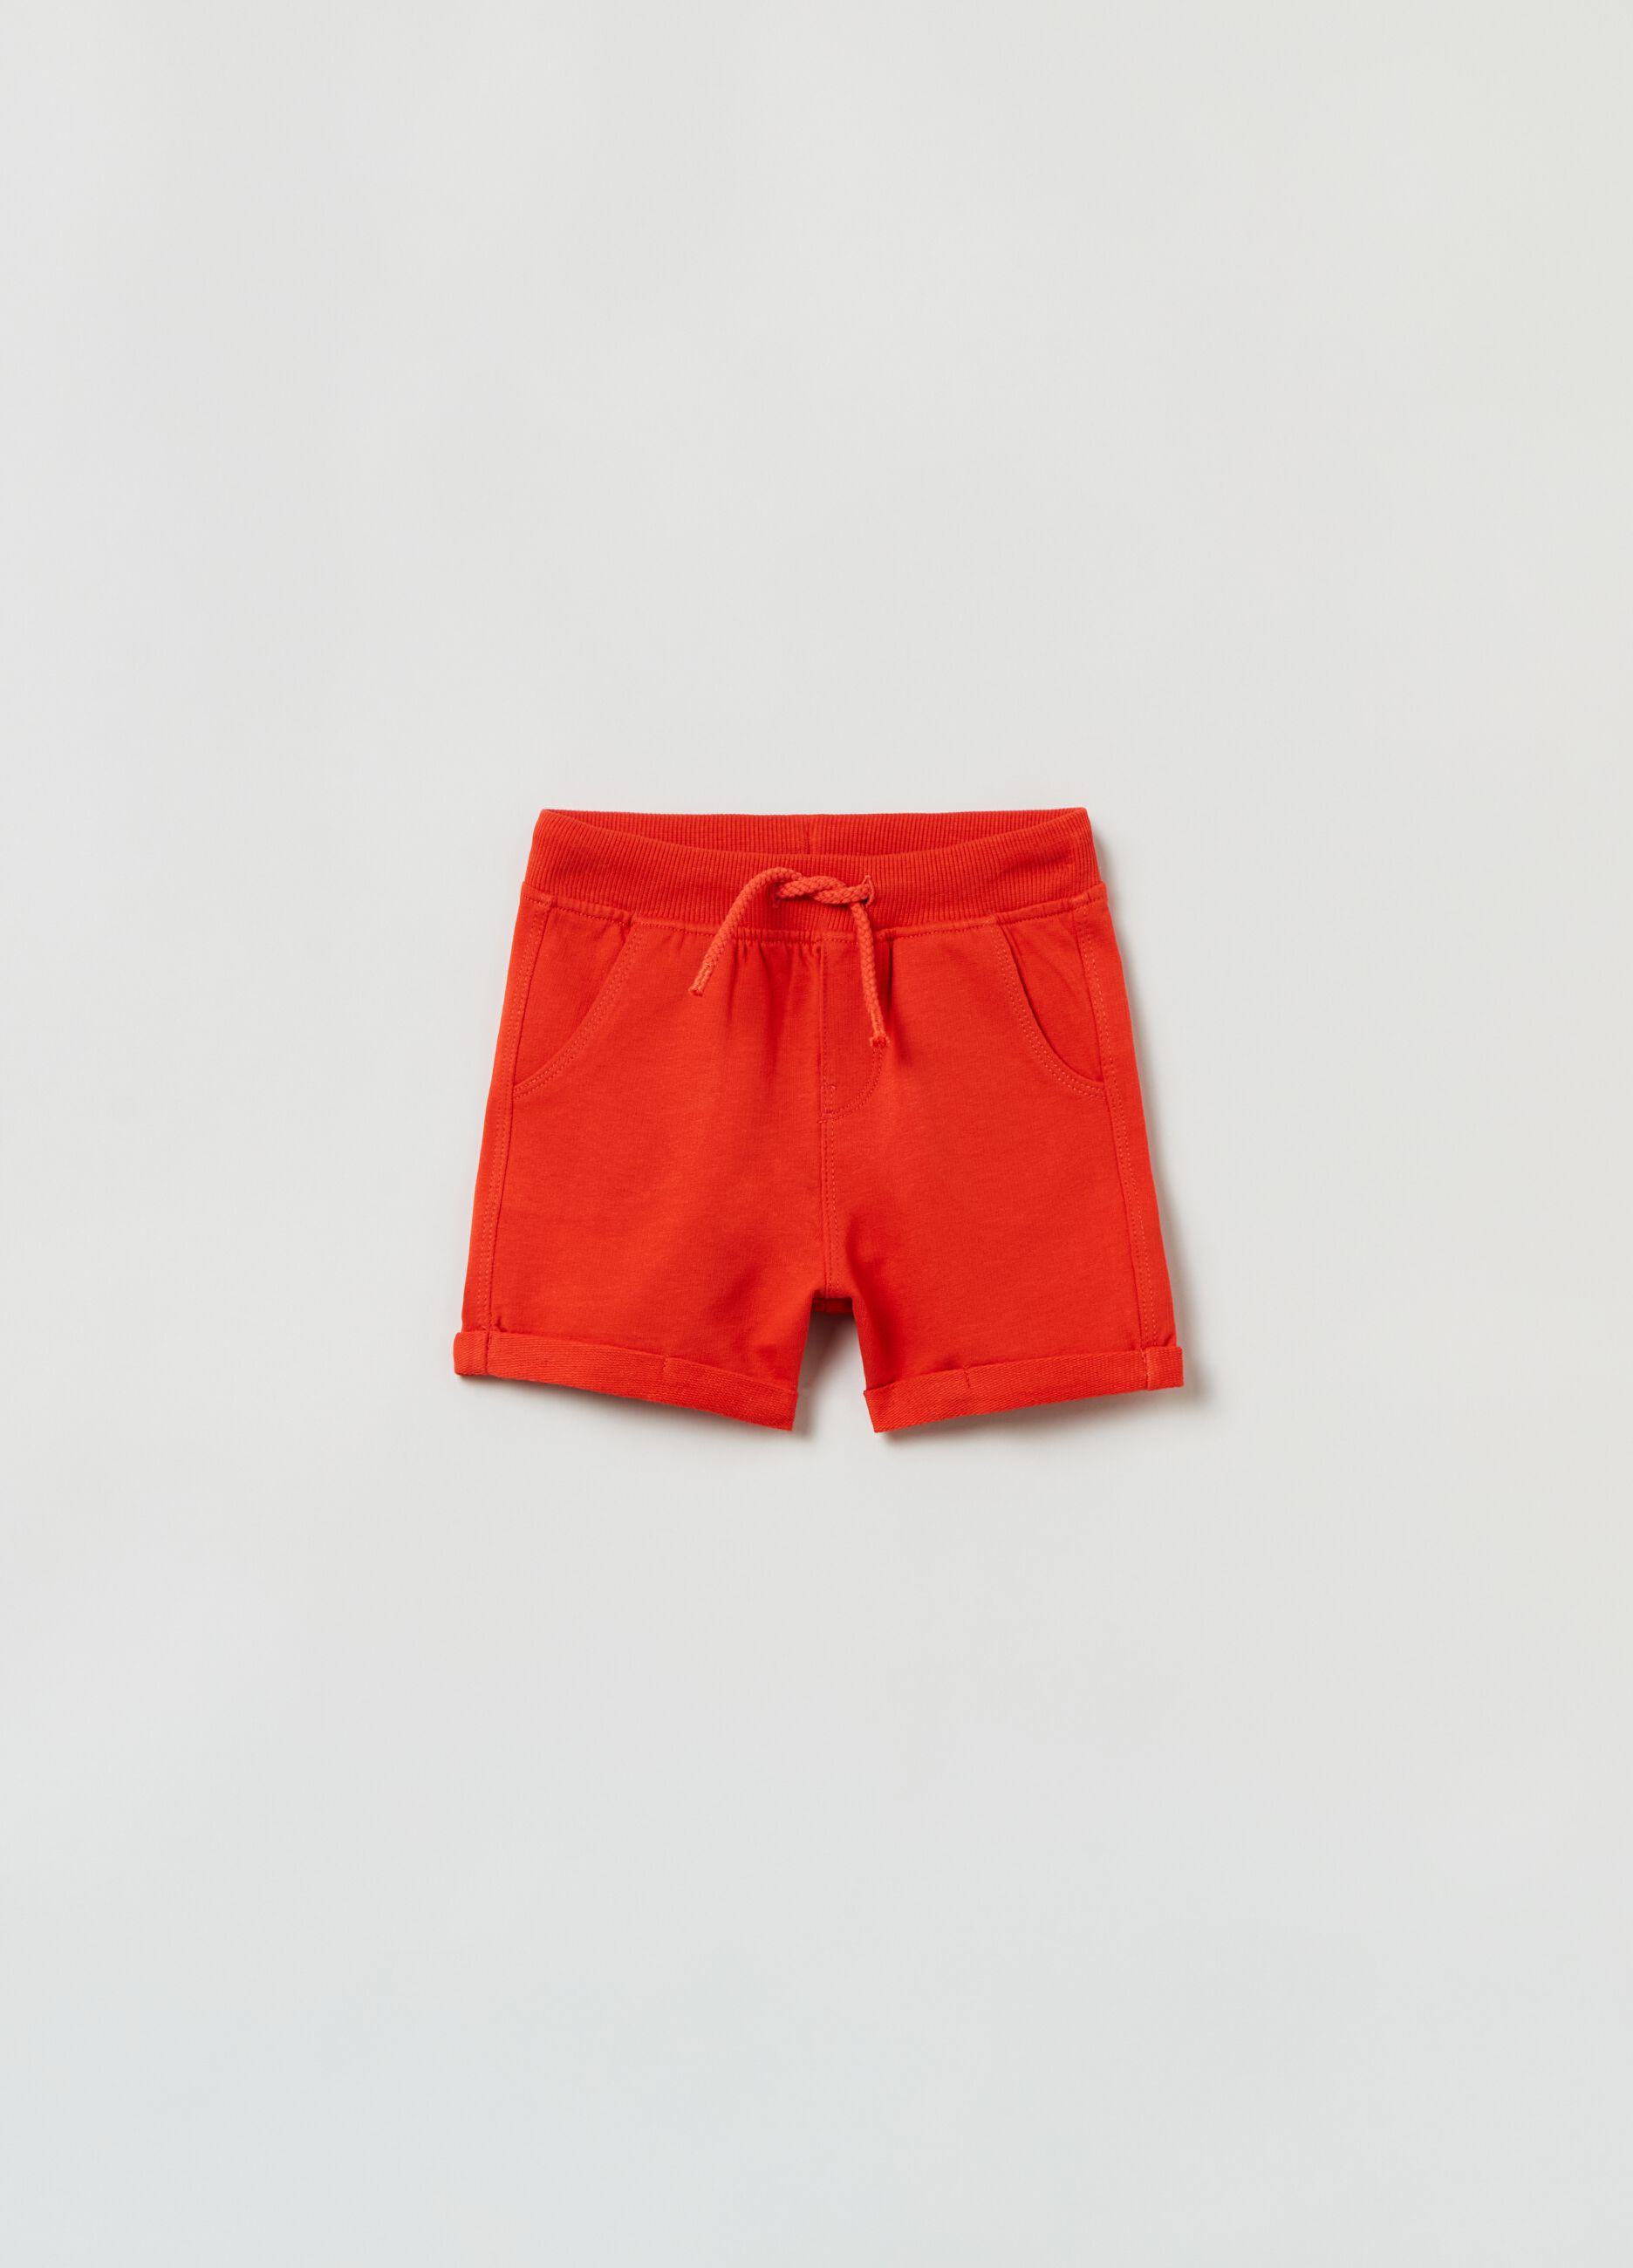 Shorts in French Terry with drawstring